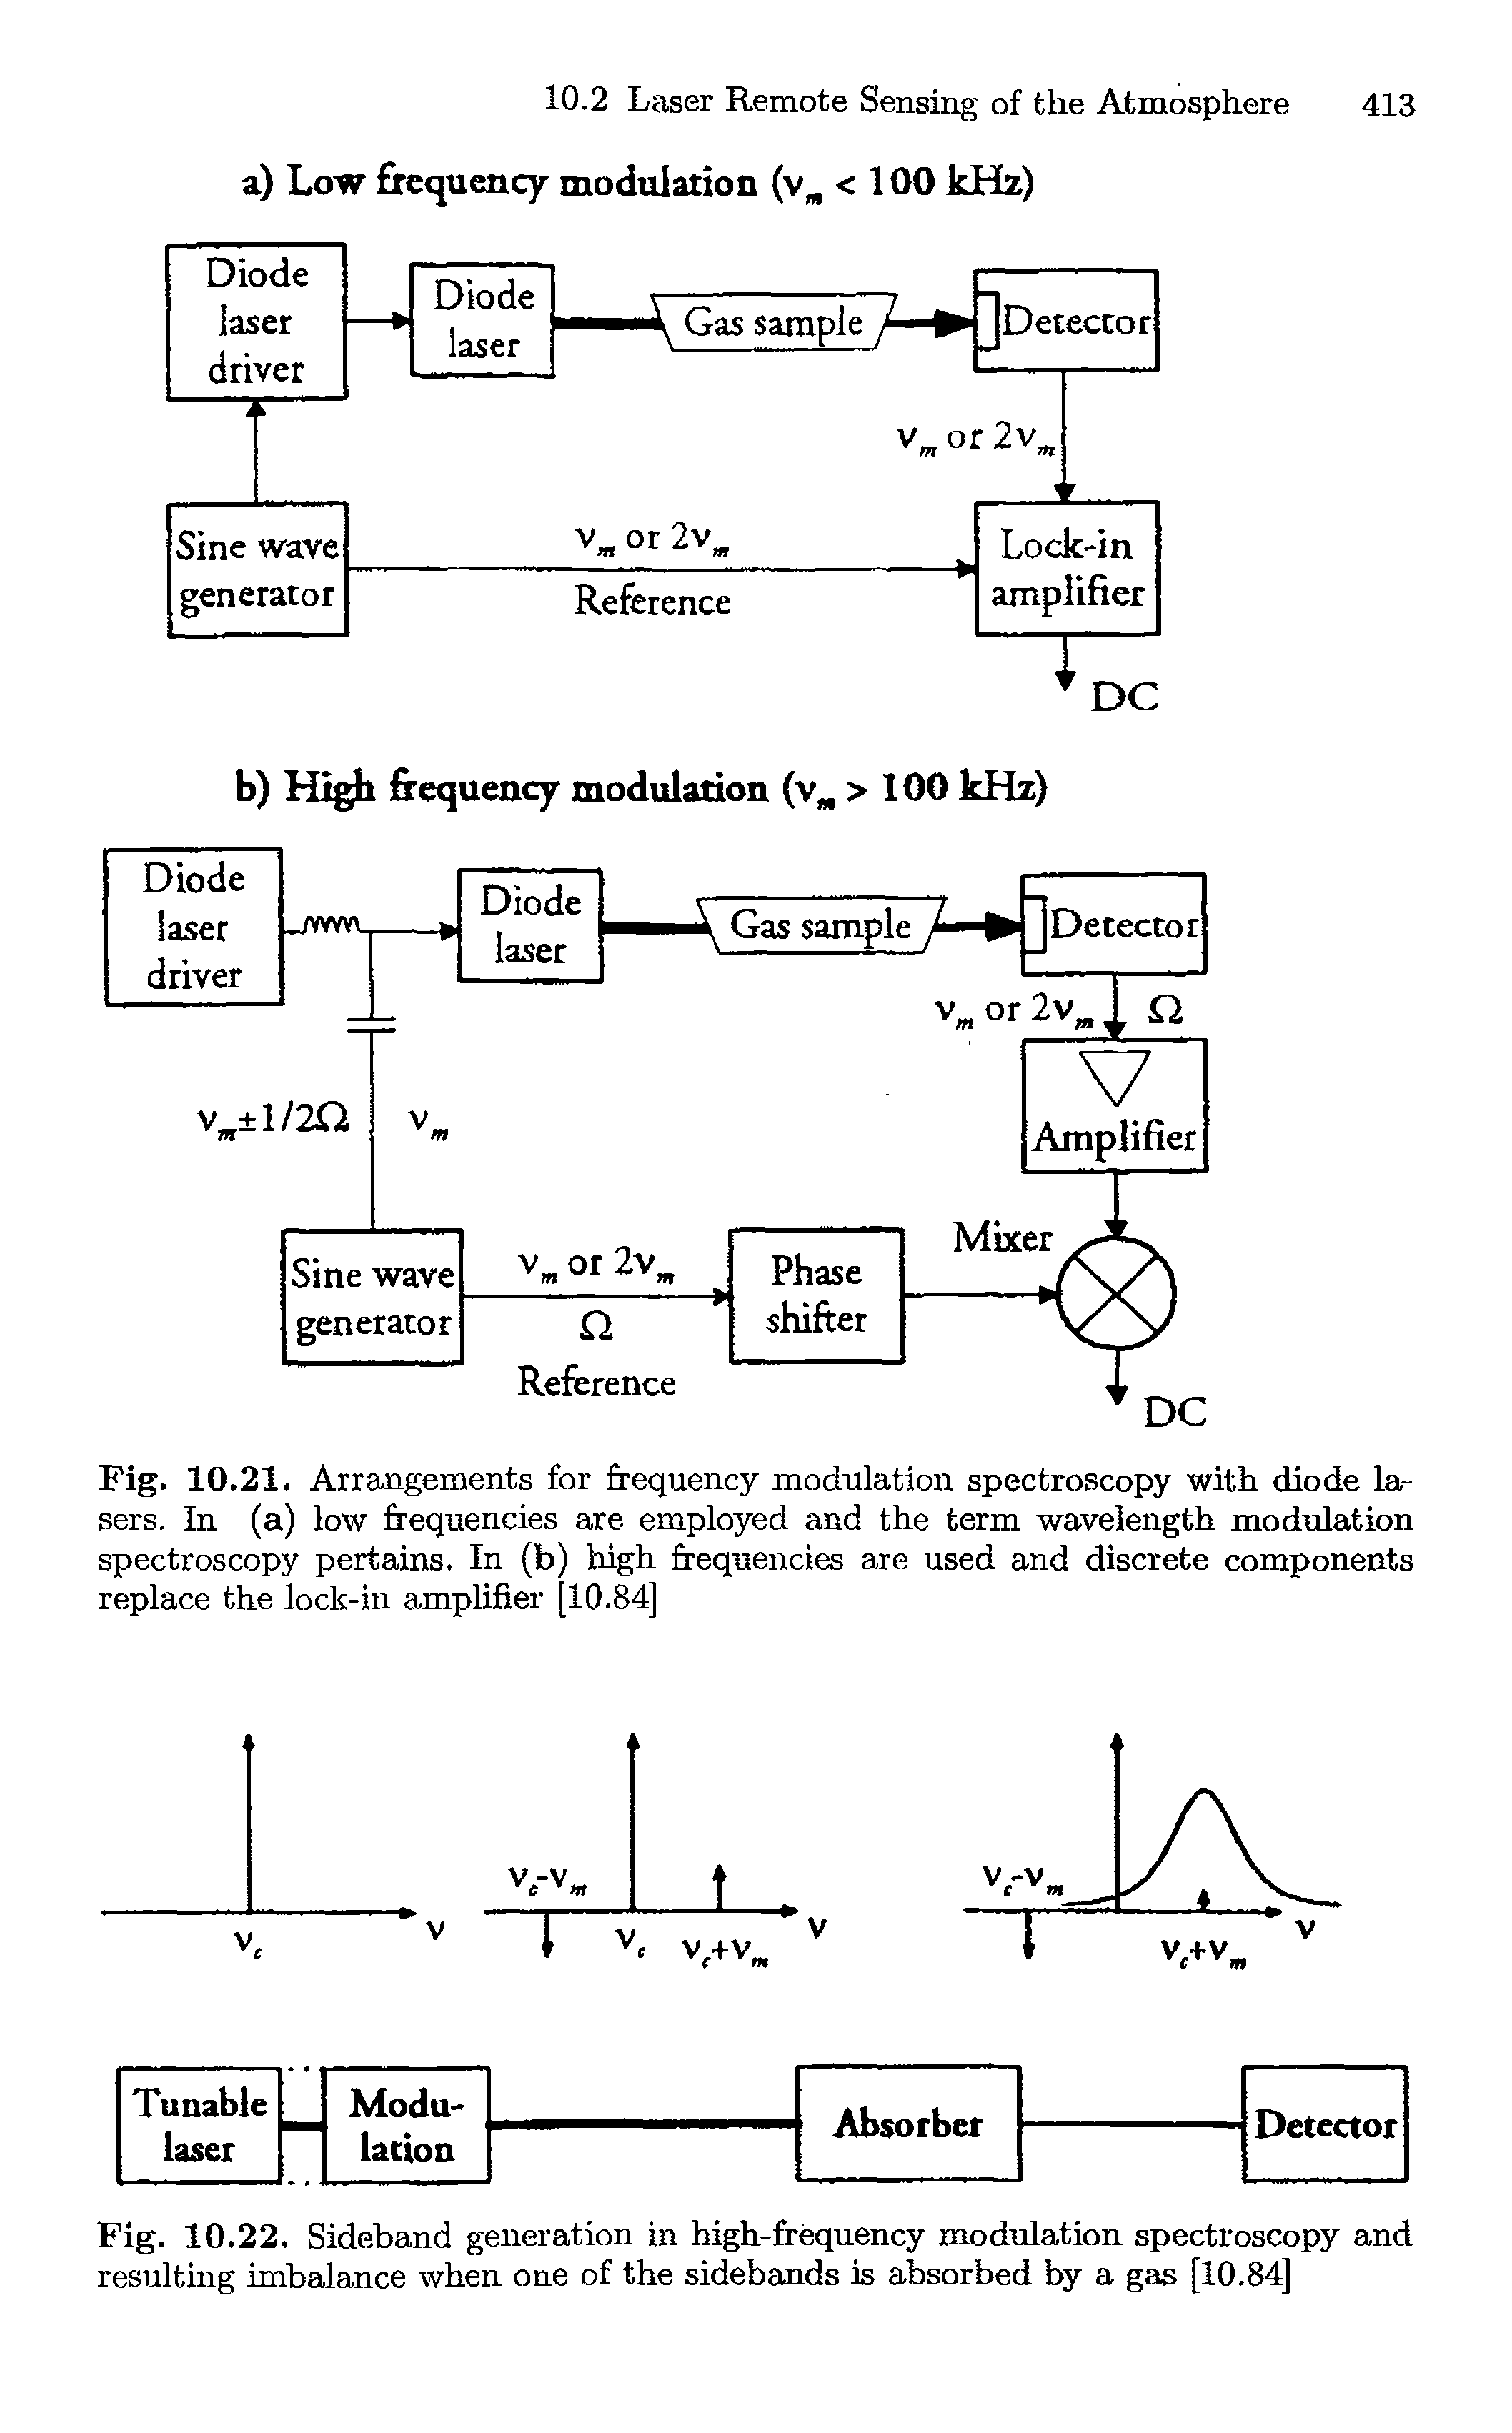 Fig. 10.21. Arrangements for frequency modulation spectroscopy with diode lasers. In (a) low frequencies are employed and the term wavelength modulation spectroscopy pertains. In (b) high frequencies are used and discrete components replace the lock-in amplifier [10.84]...